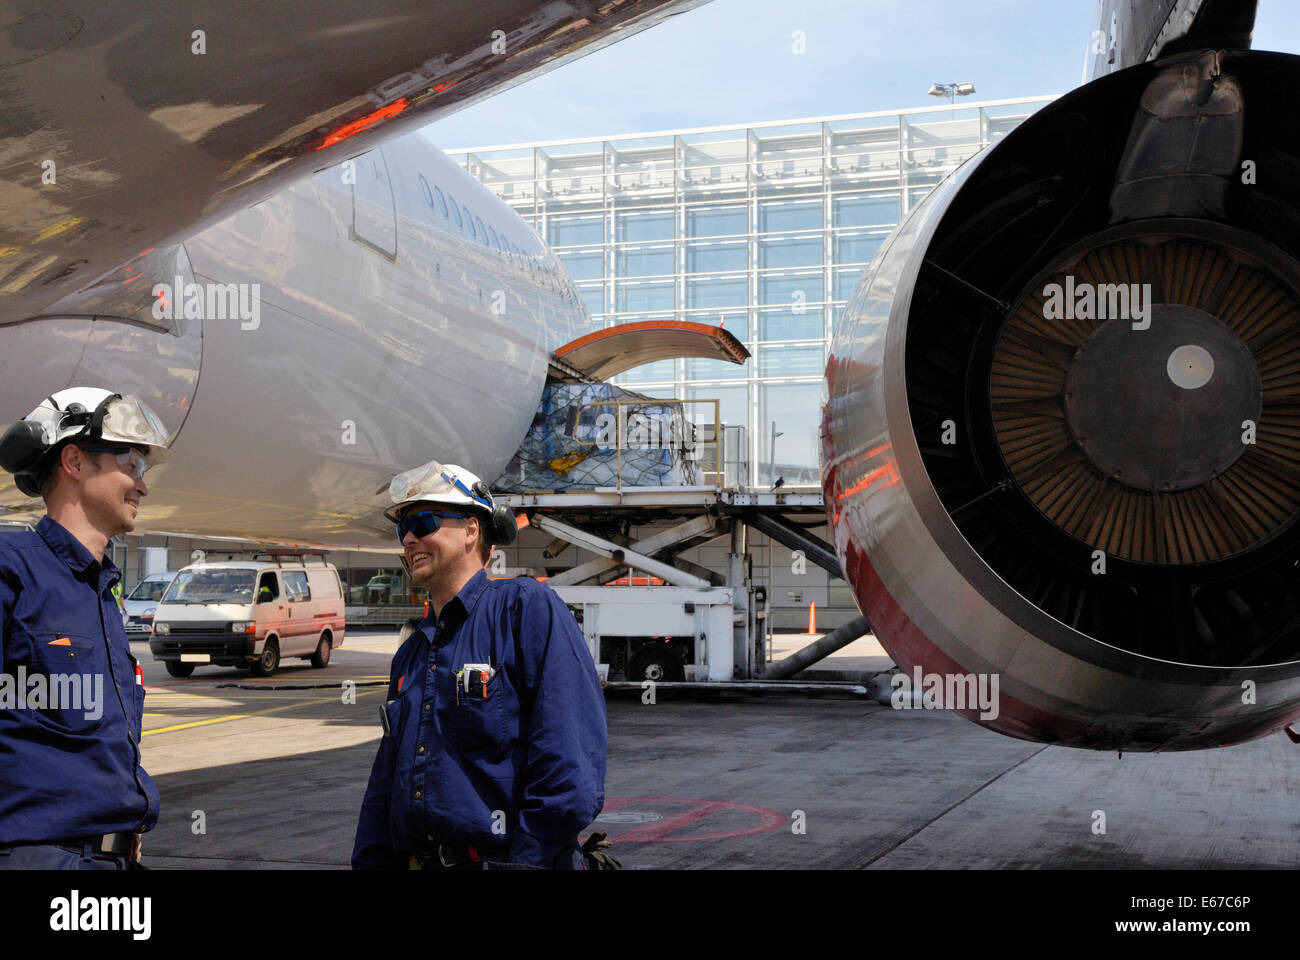 airplane mechanic with large jet engine in the background Stock Photo